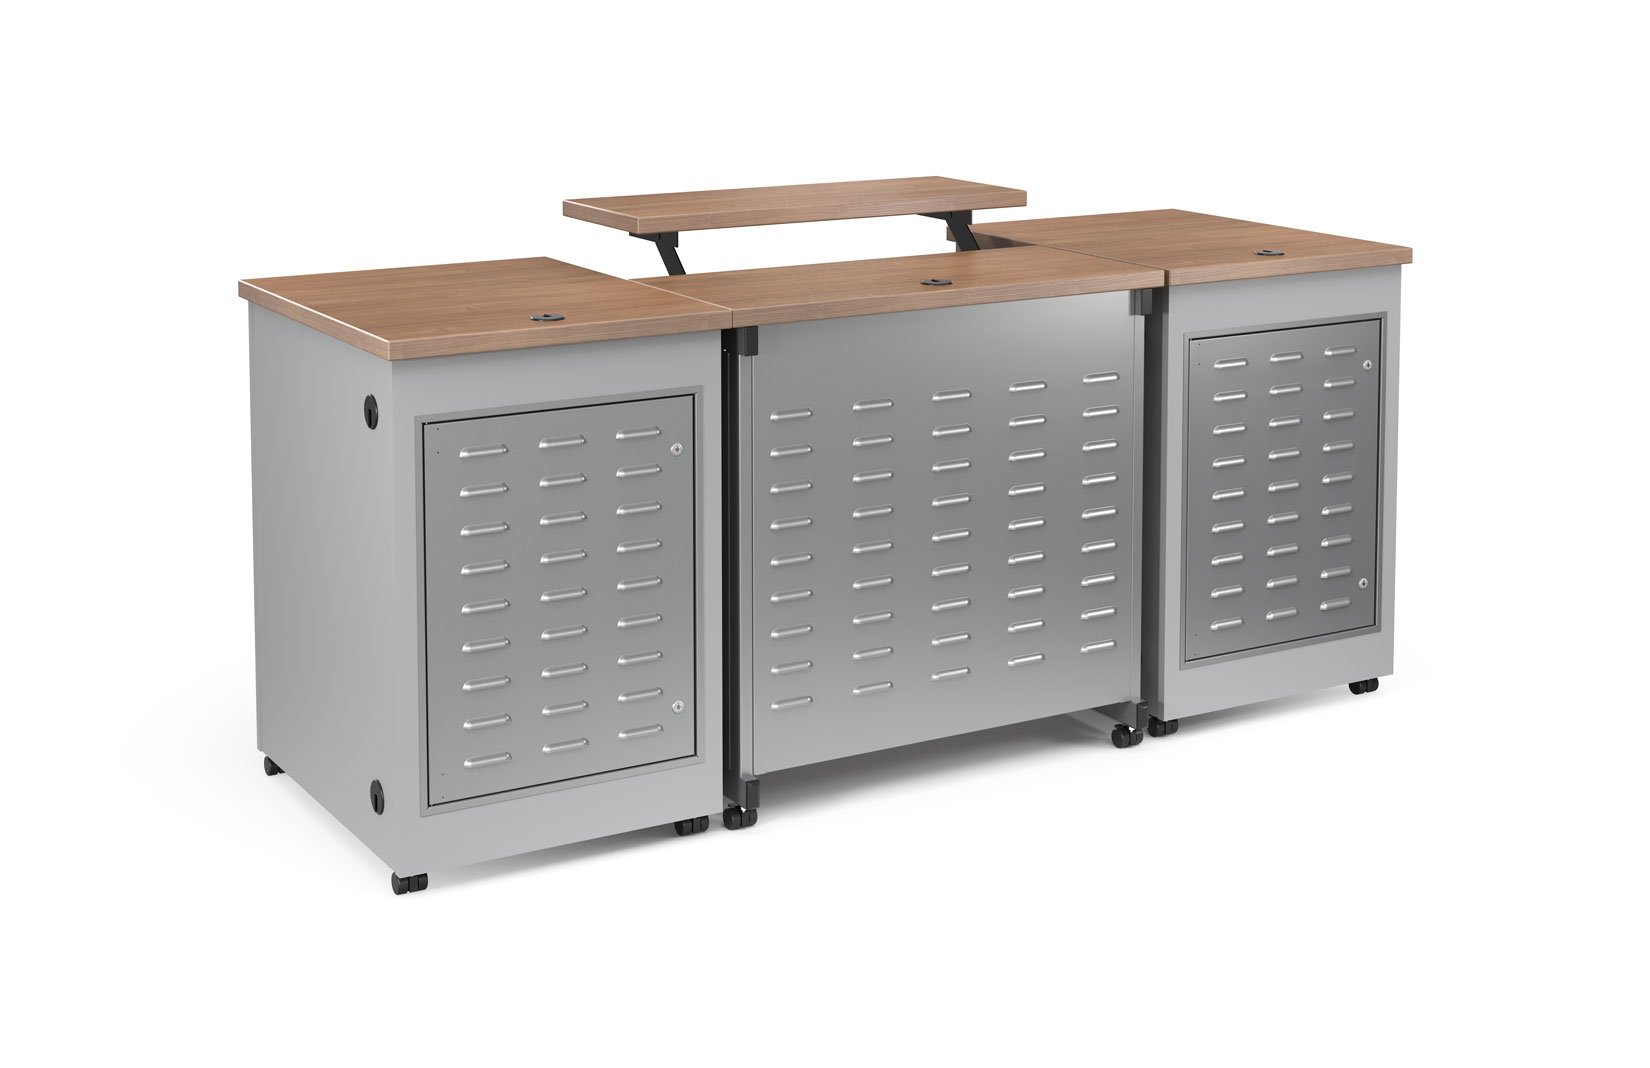 2022-08-15_Configurable_IT_Table_Lectern_and_Cabinets_Back.jpg